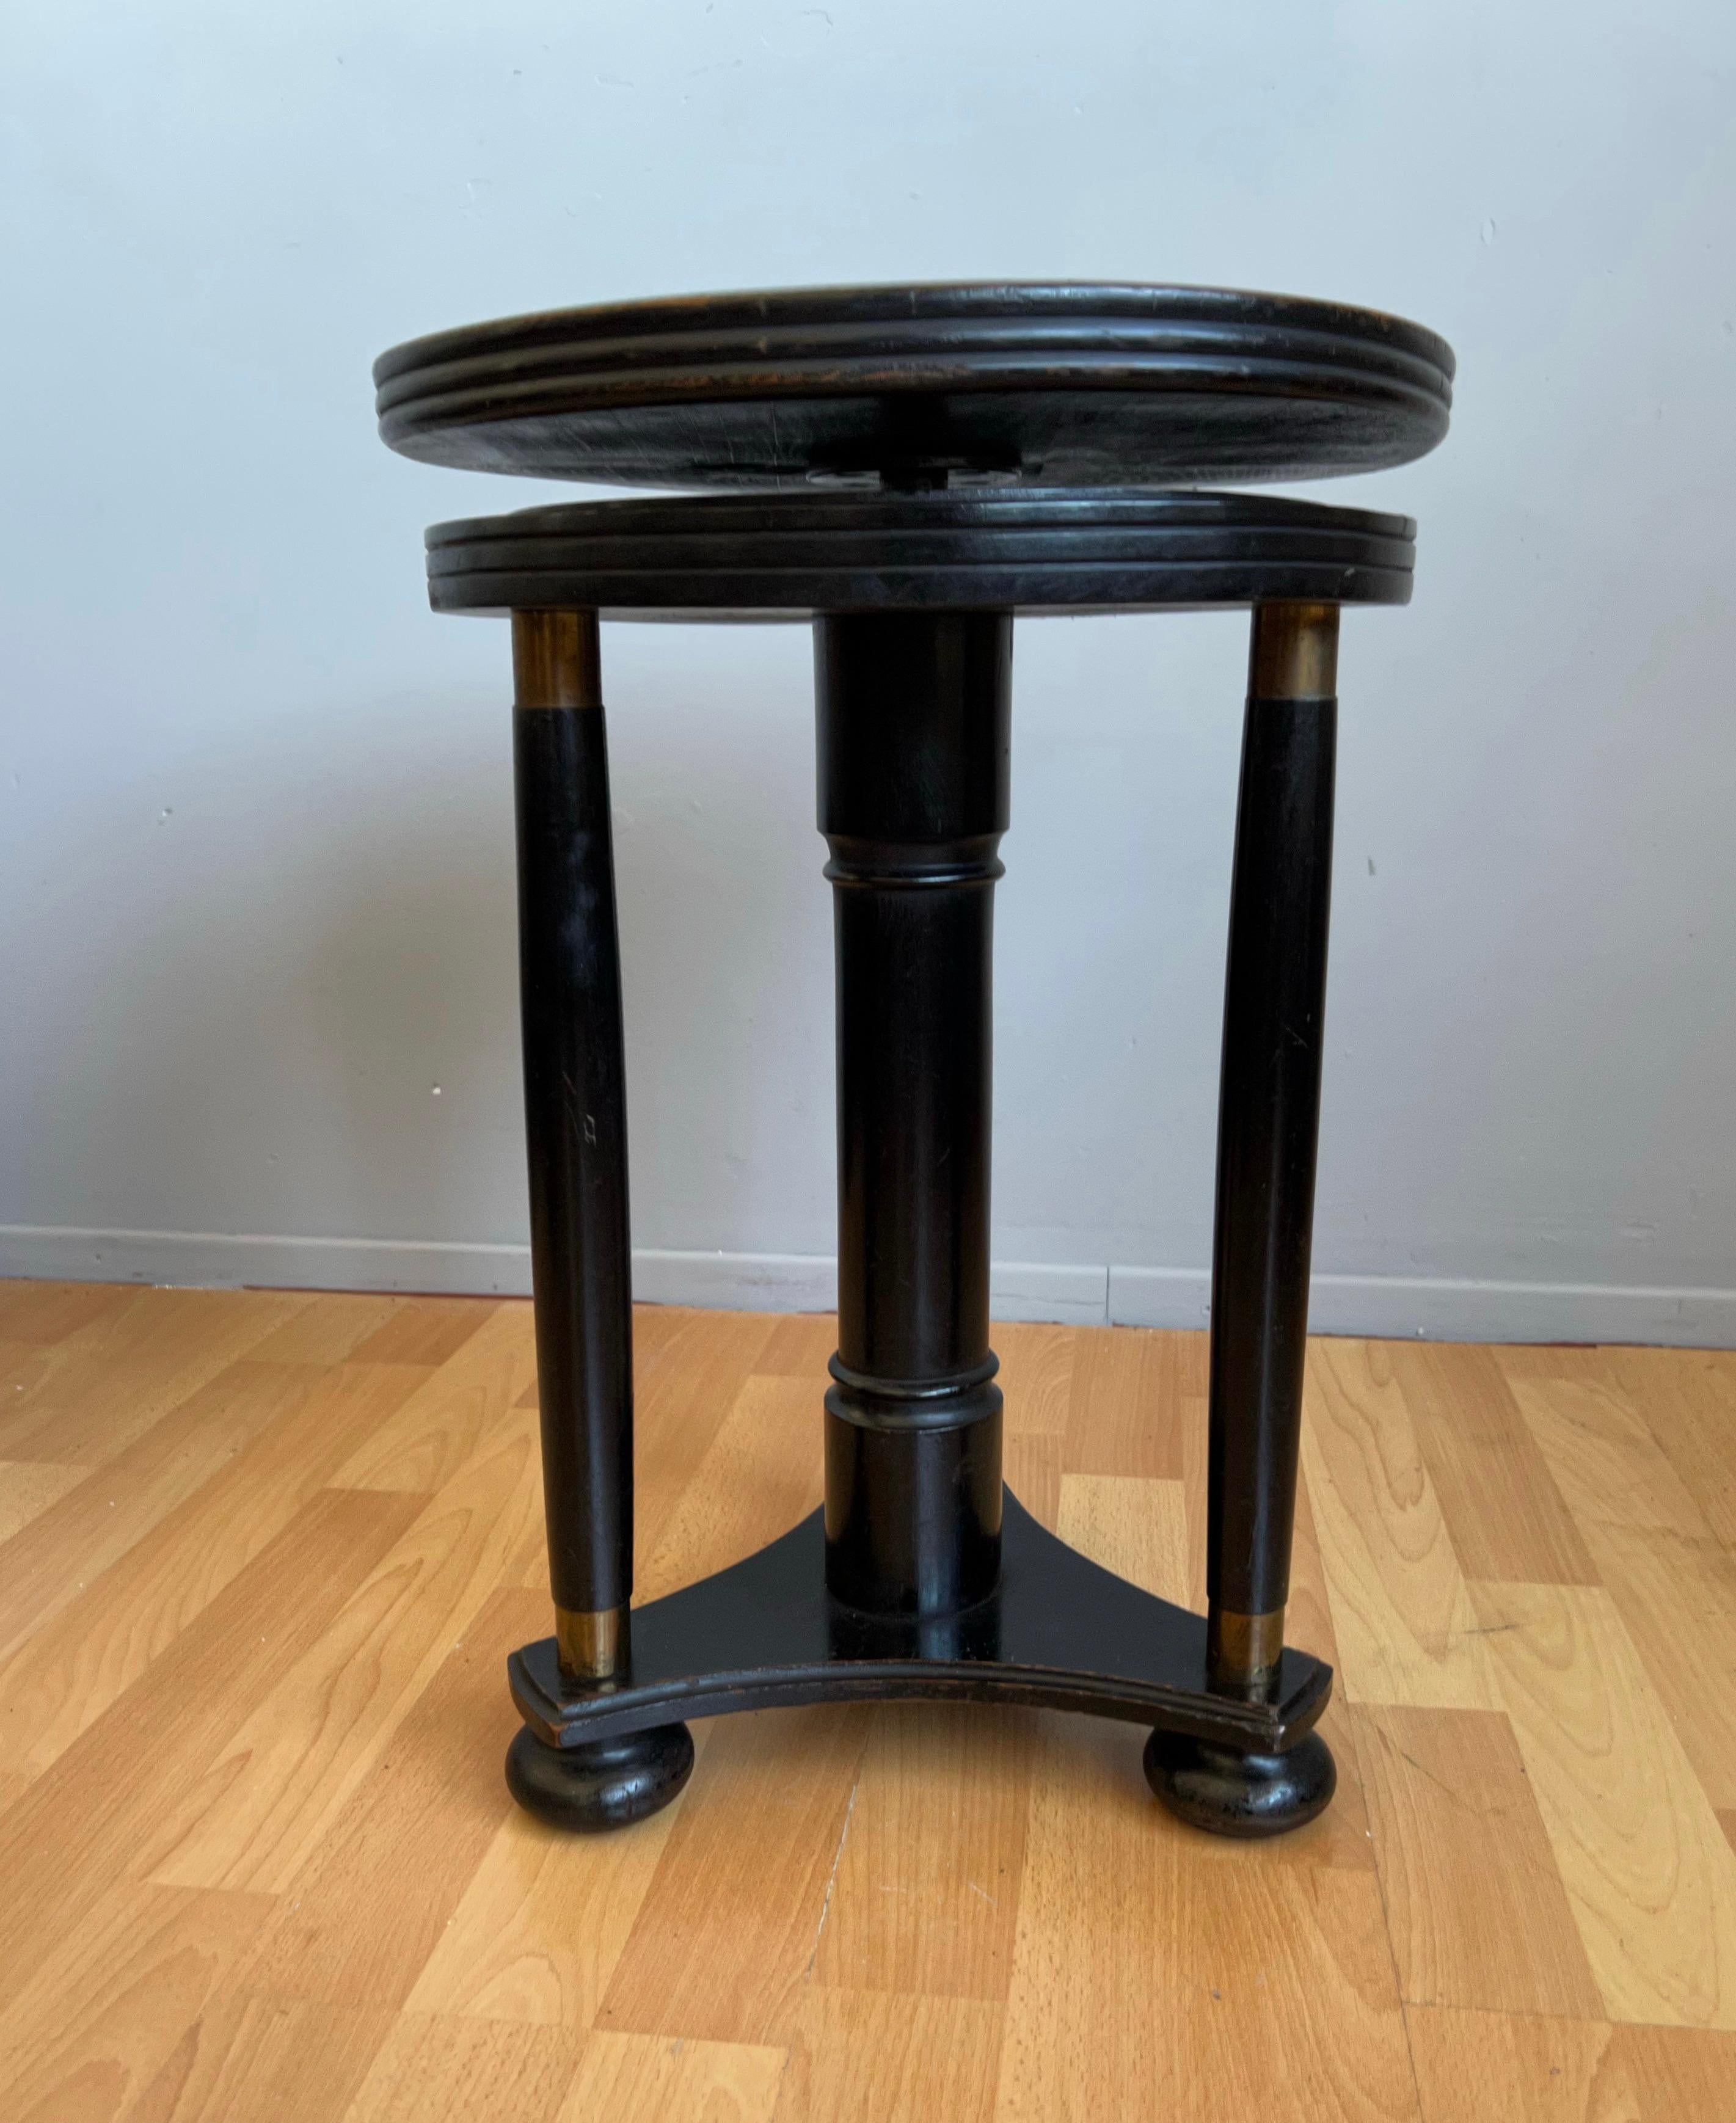 Stylish Blackened Wooden and Brass Art Deco Desk or Piano Swivel Stool, ca 1900 For Sale 9